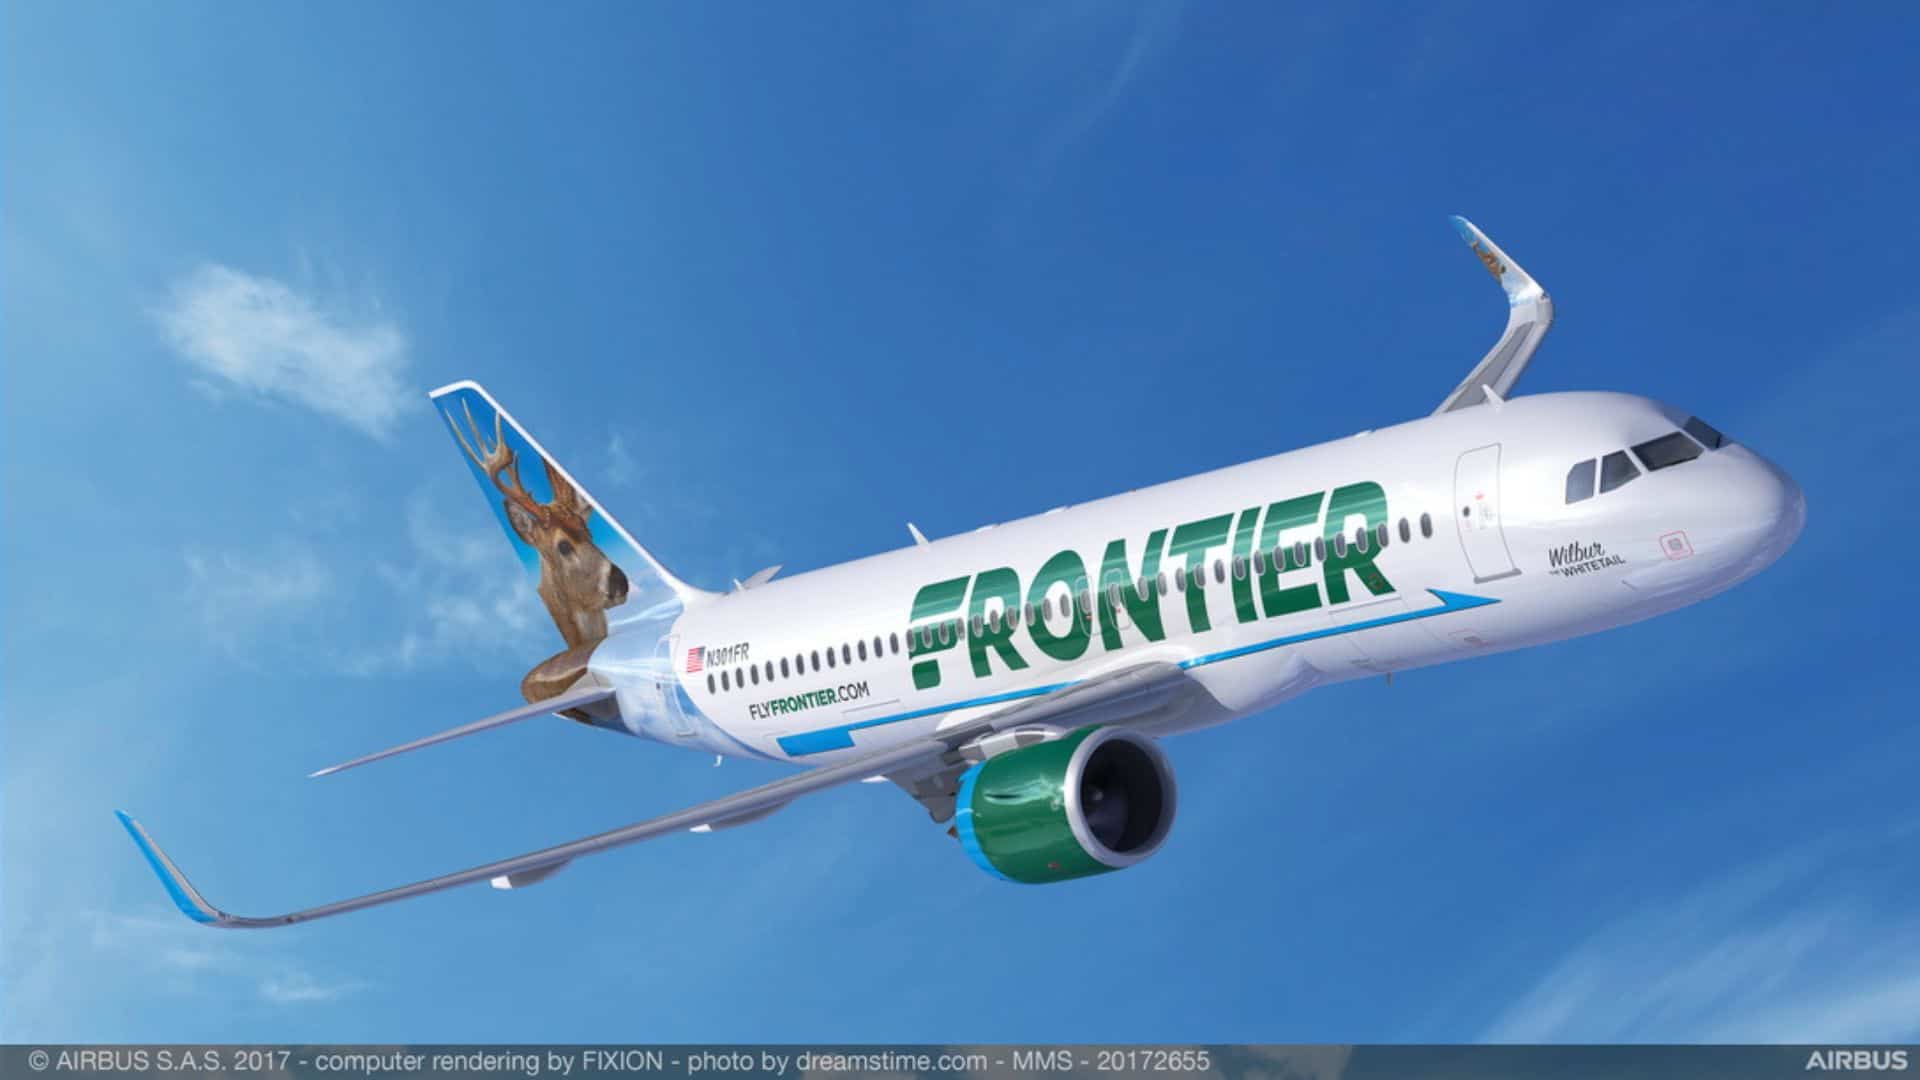 Does frontier airlines have wifi